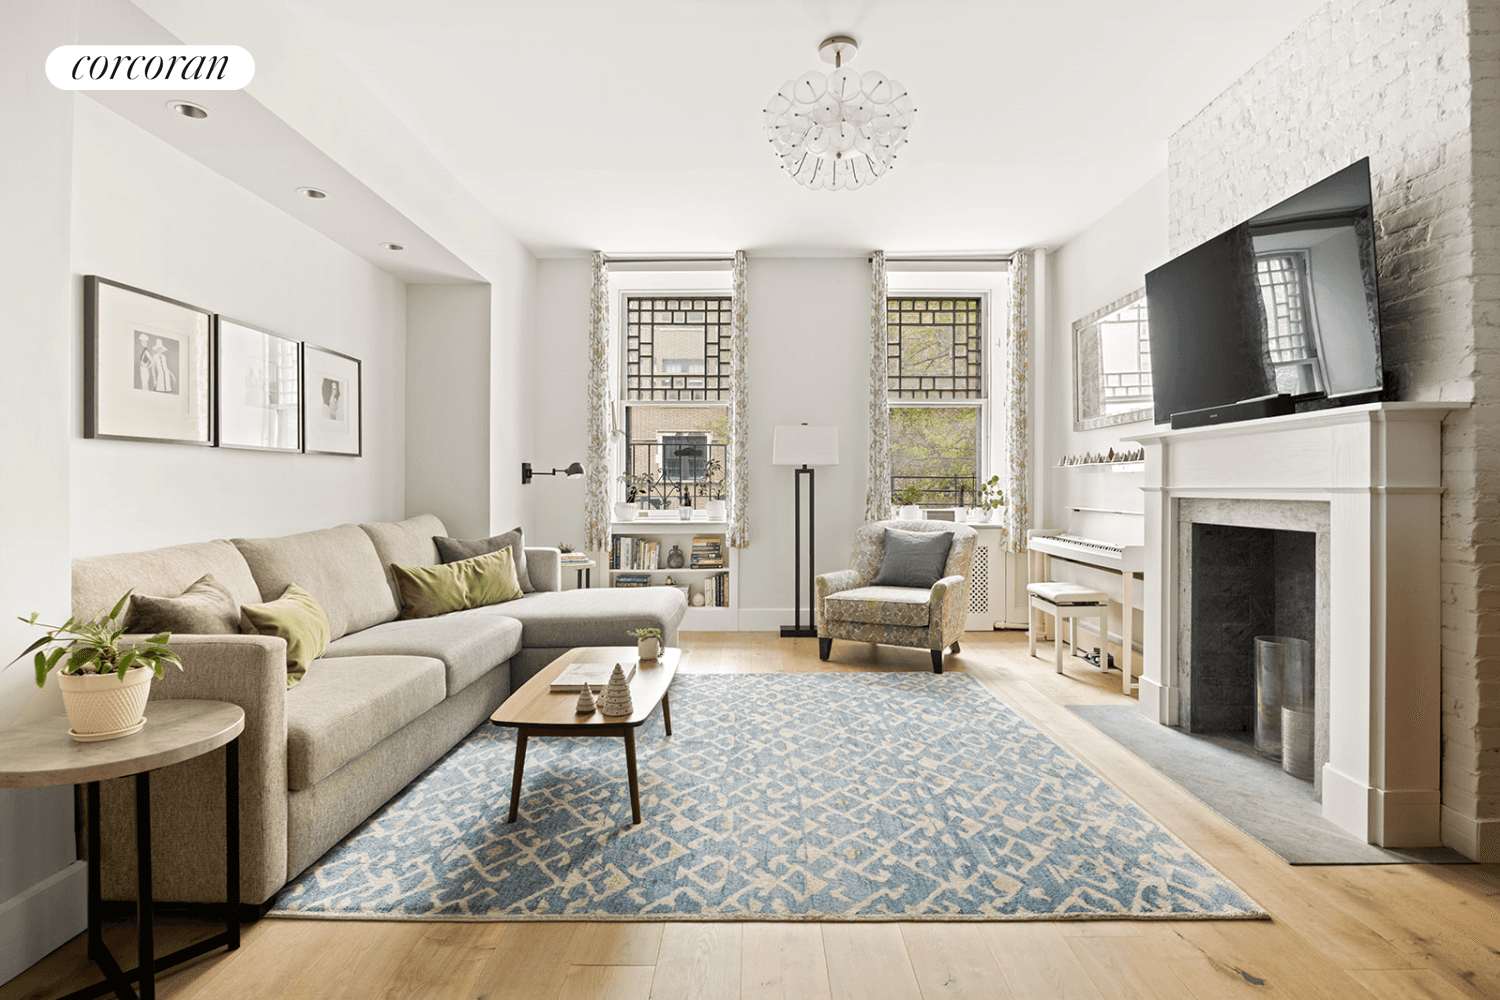 With an unbeatable location, this gorgeous two bedroom apartment at 62 Montague Street was gut renovated, top to bottom, in 2019 and will wow you with its style and design.